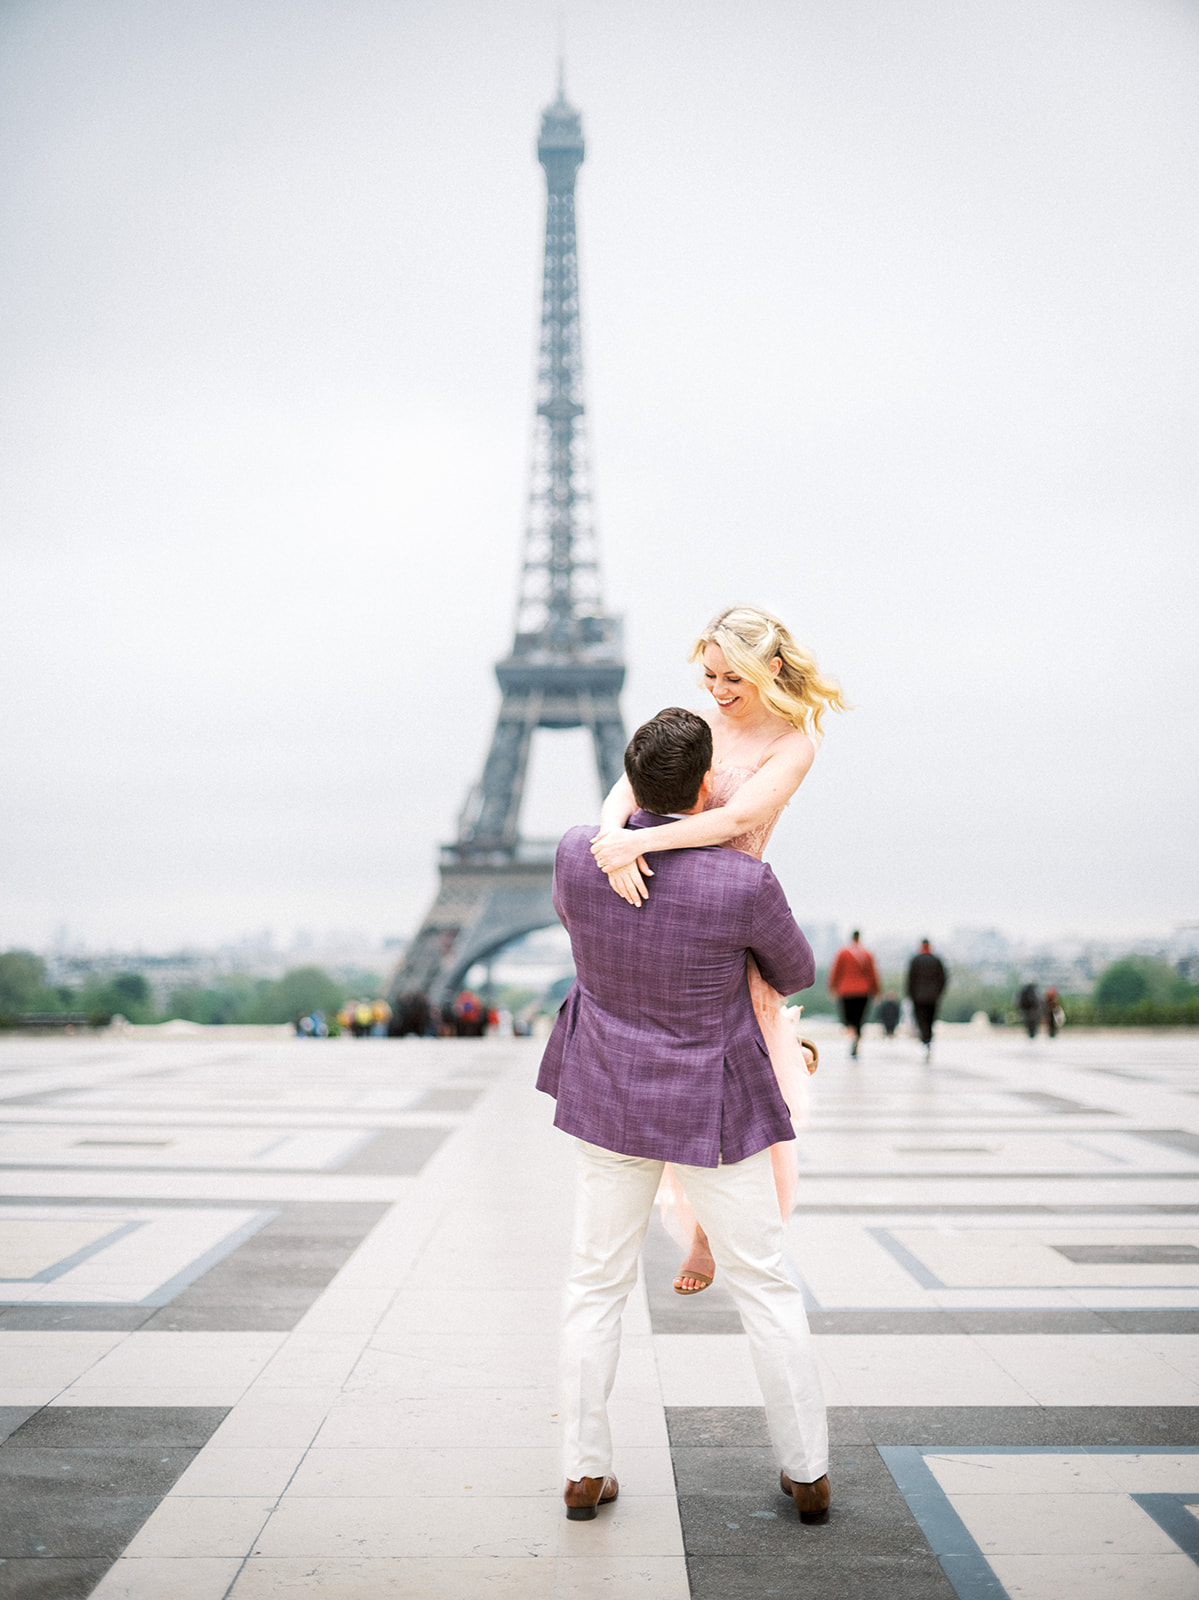 Man spinning woman in front of the Eiffel Tower.